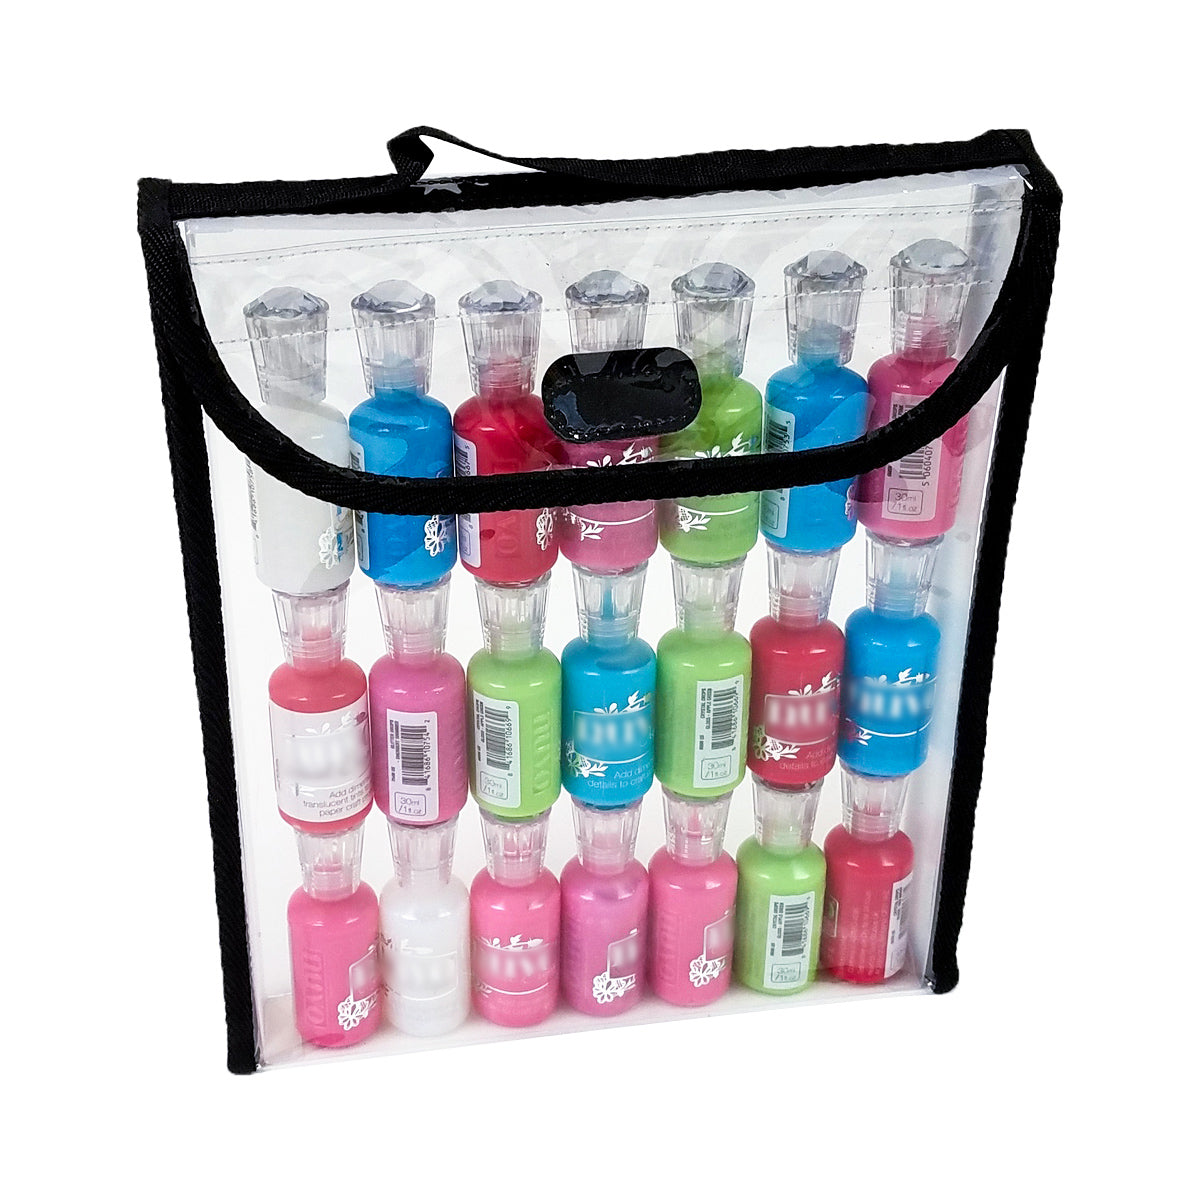 Organize and store Nuvo drops